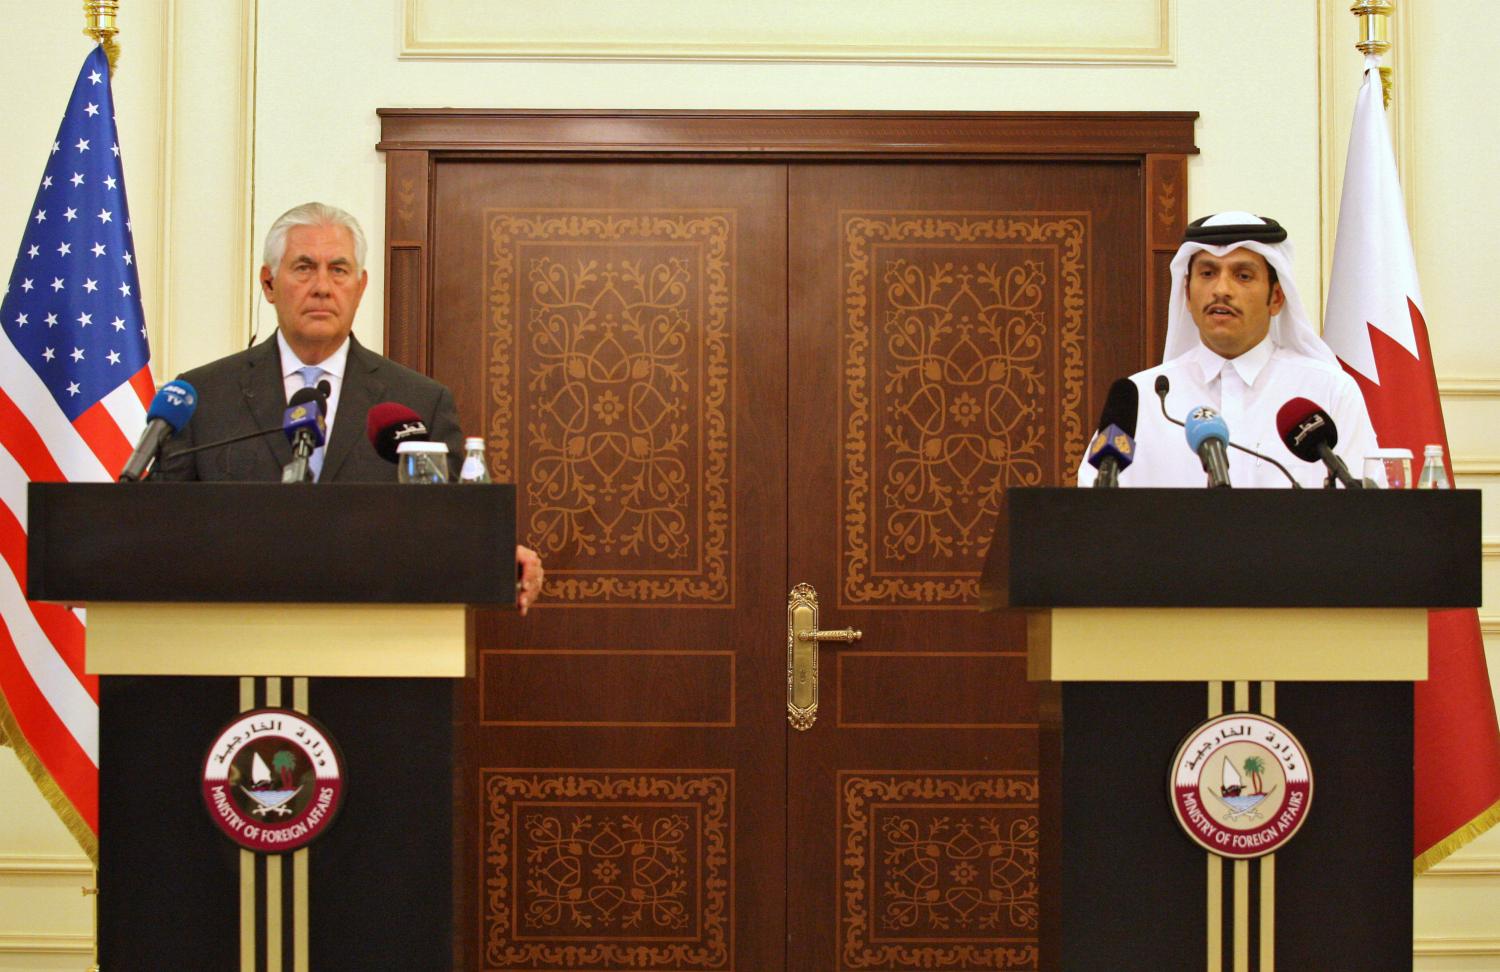 Press conference with U.S. Secretary of State Rex Tillerson and Qatari Foreign Minister Sheikh Mohammed bin Abdulrahman al-Thani